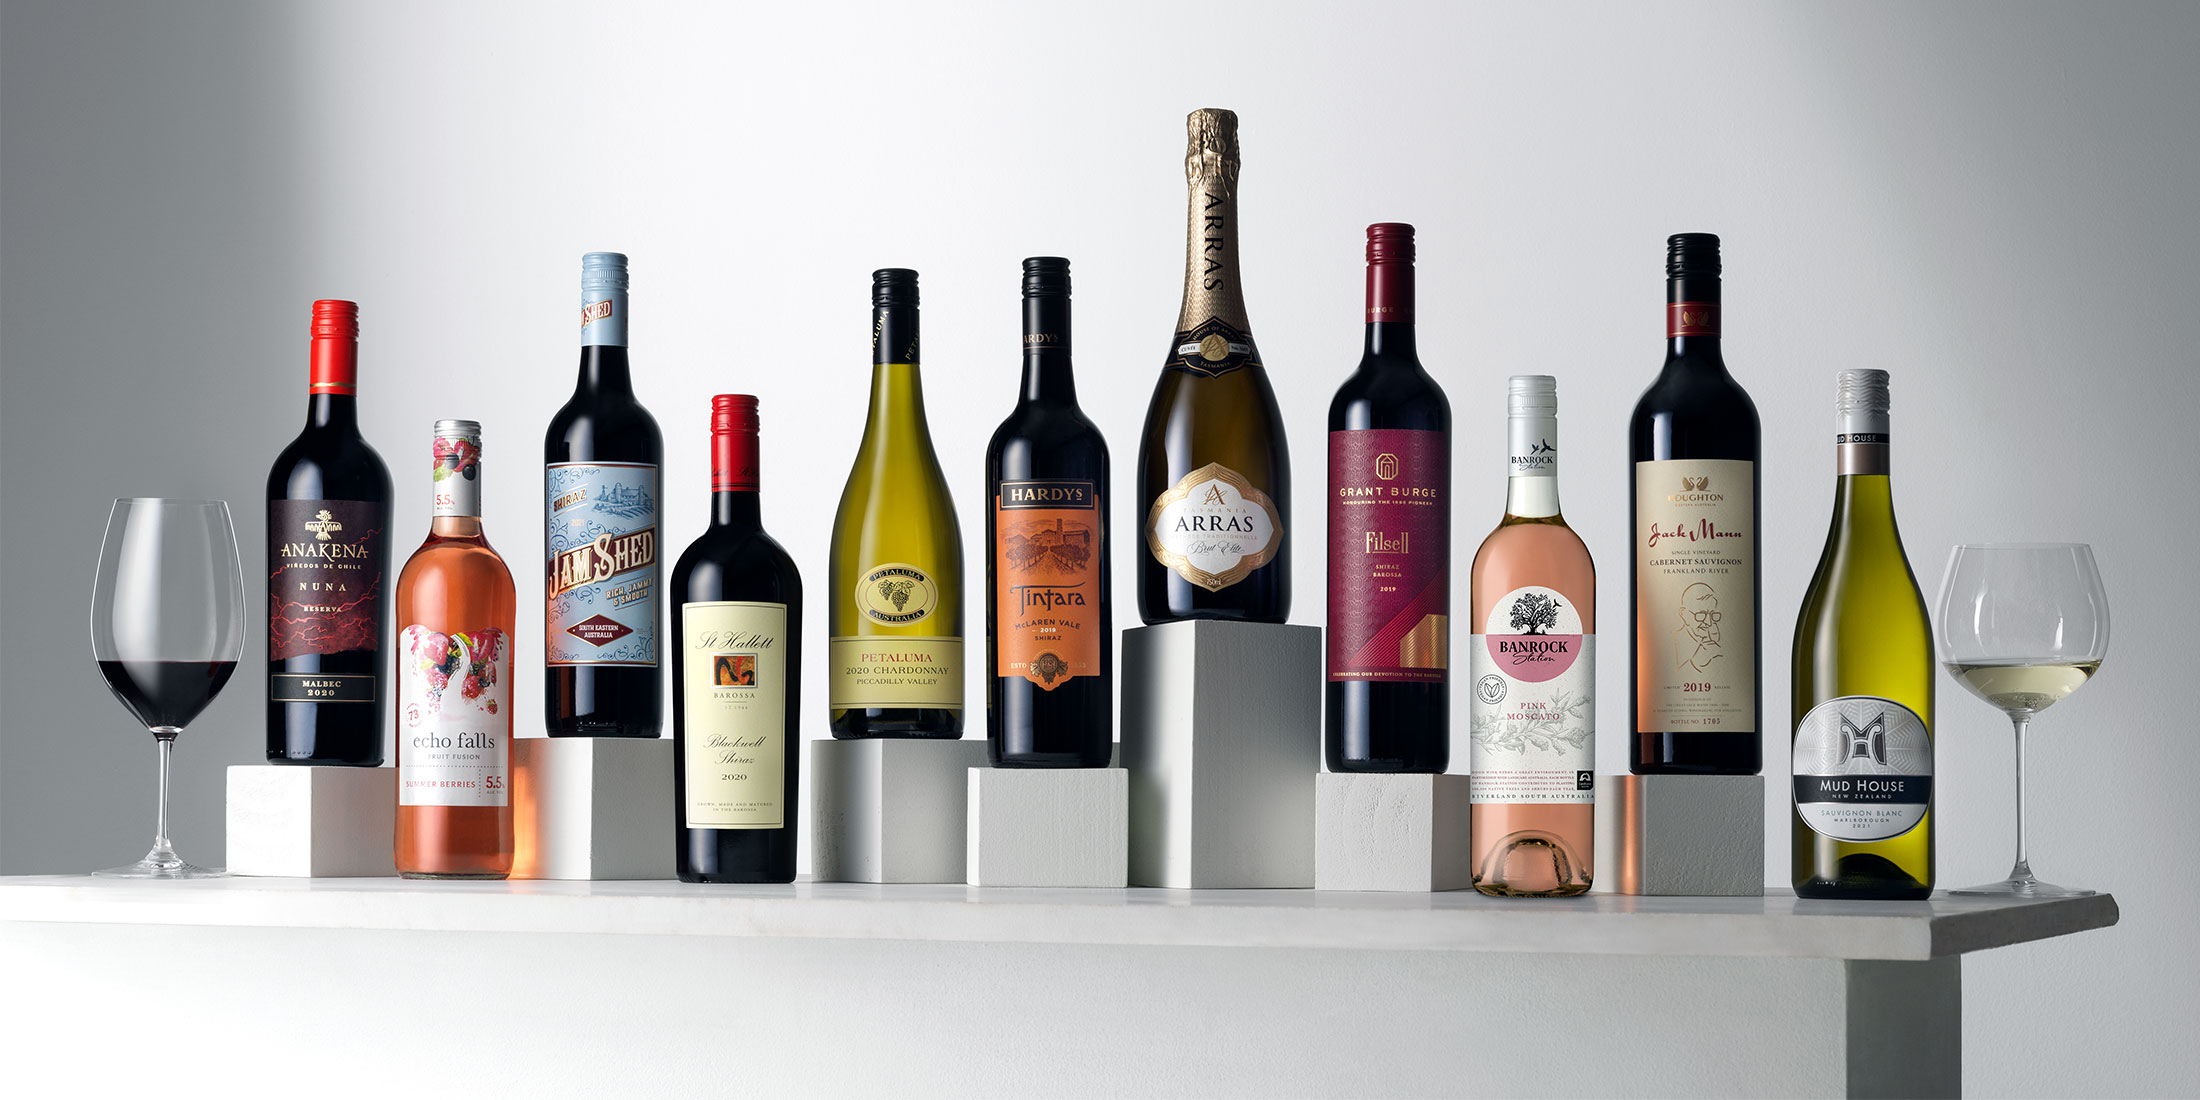 bottles of wine from the accolade wines portfolio against a white background